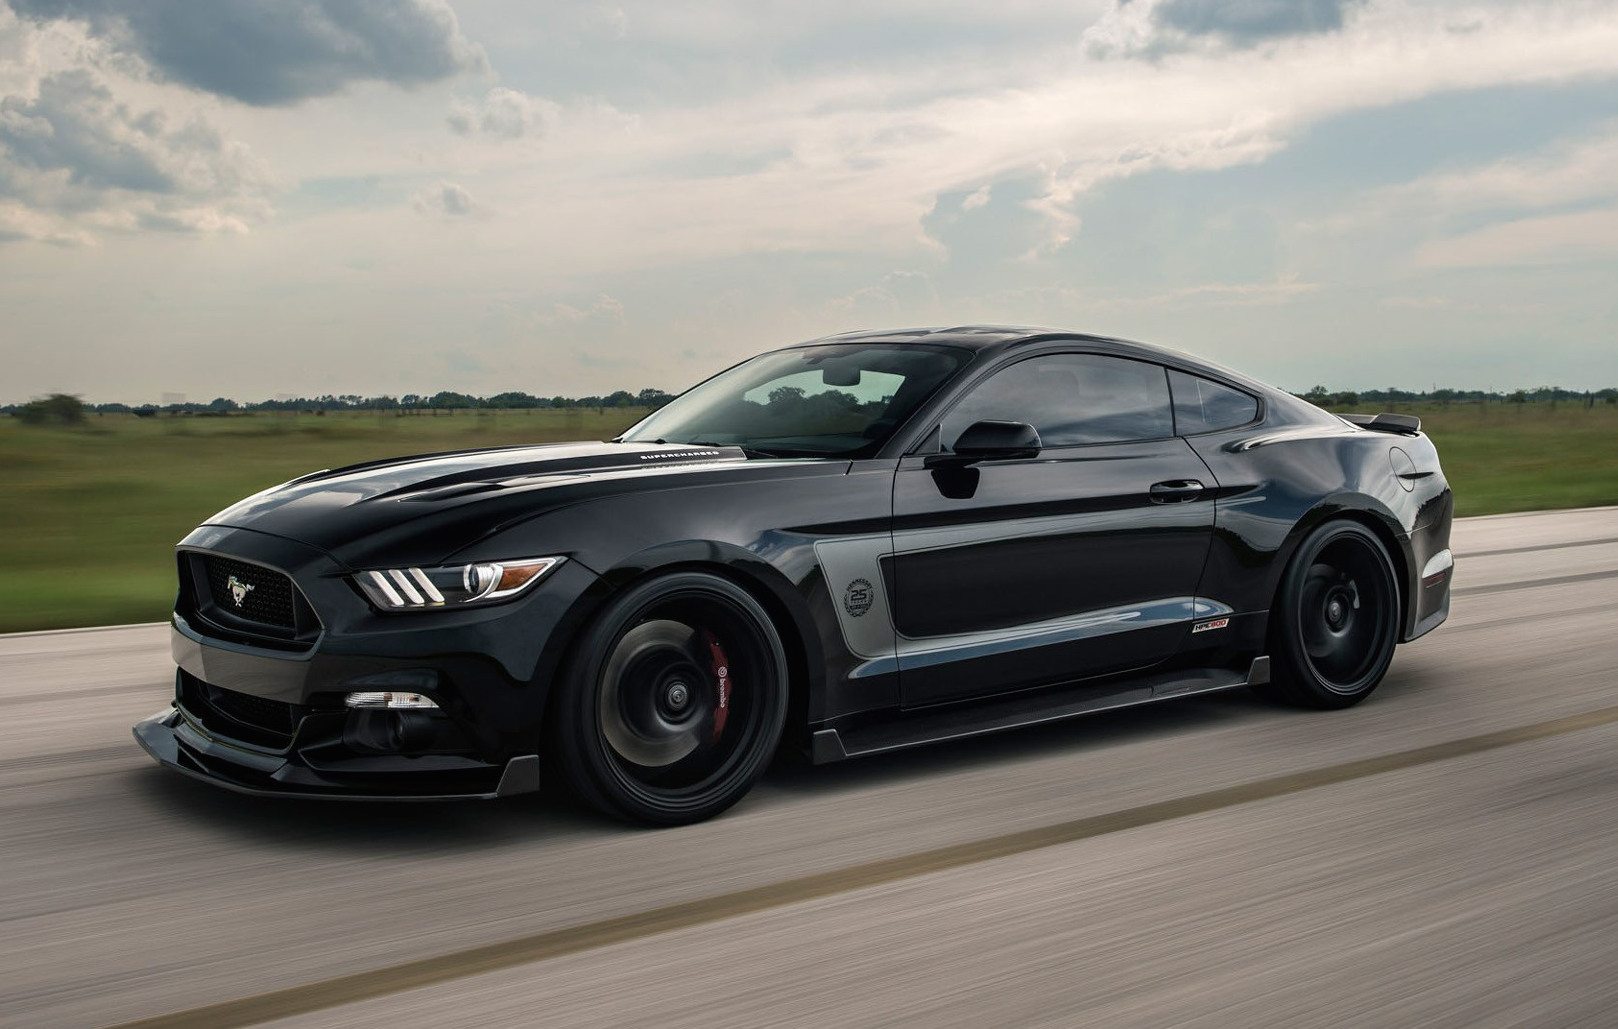 Hennessey Mustang HPE800 celebrates 25th anniversary